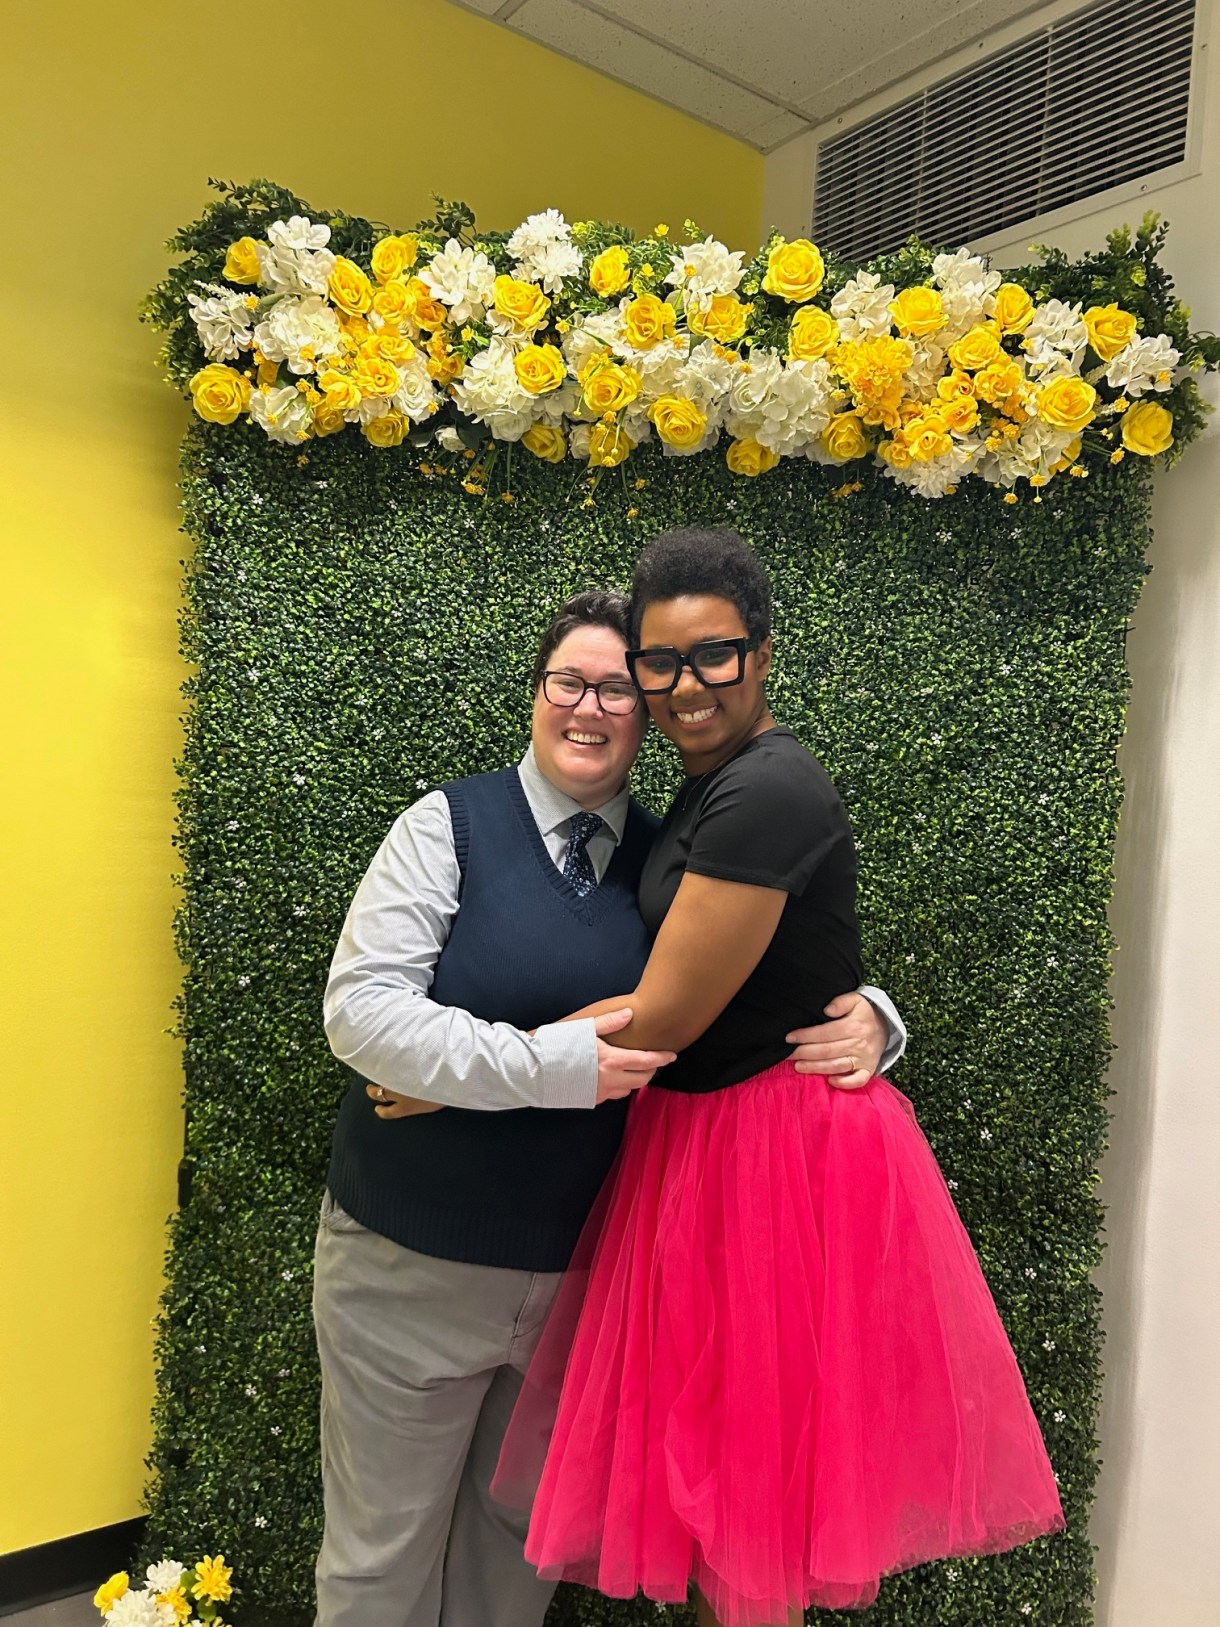 The author (a black woman with short hair) and her wife (a white butch with brown hair) pose on their wedding day.